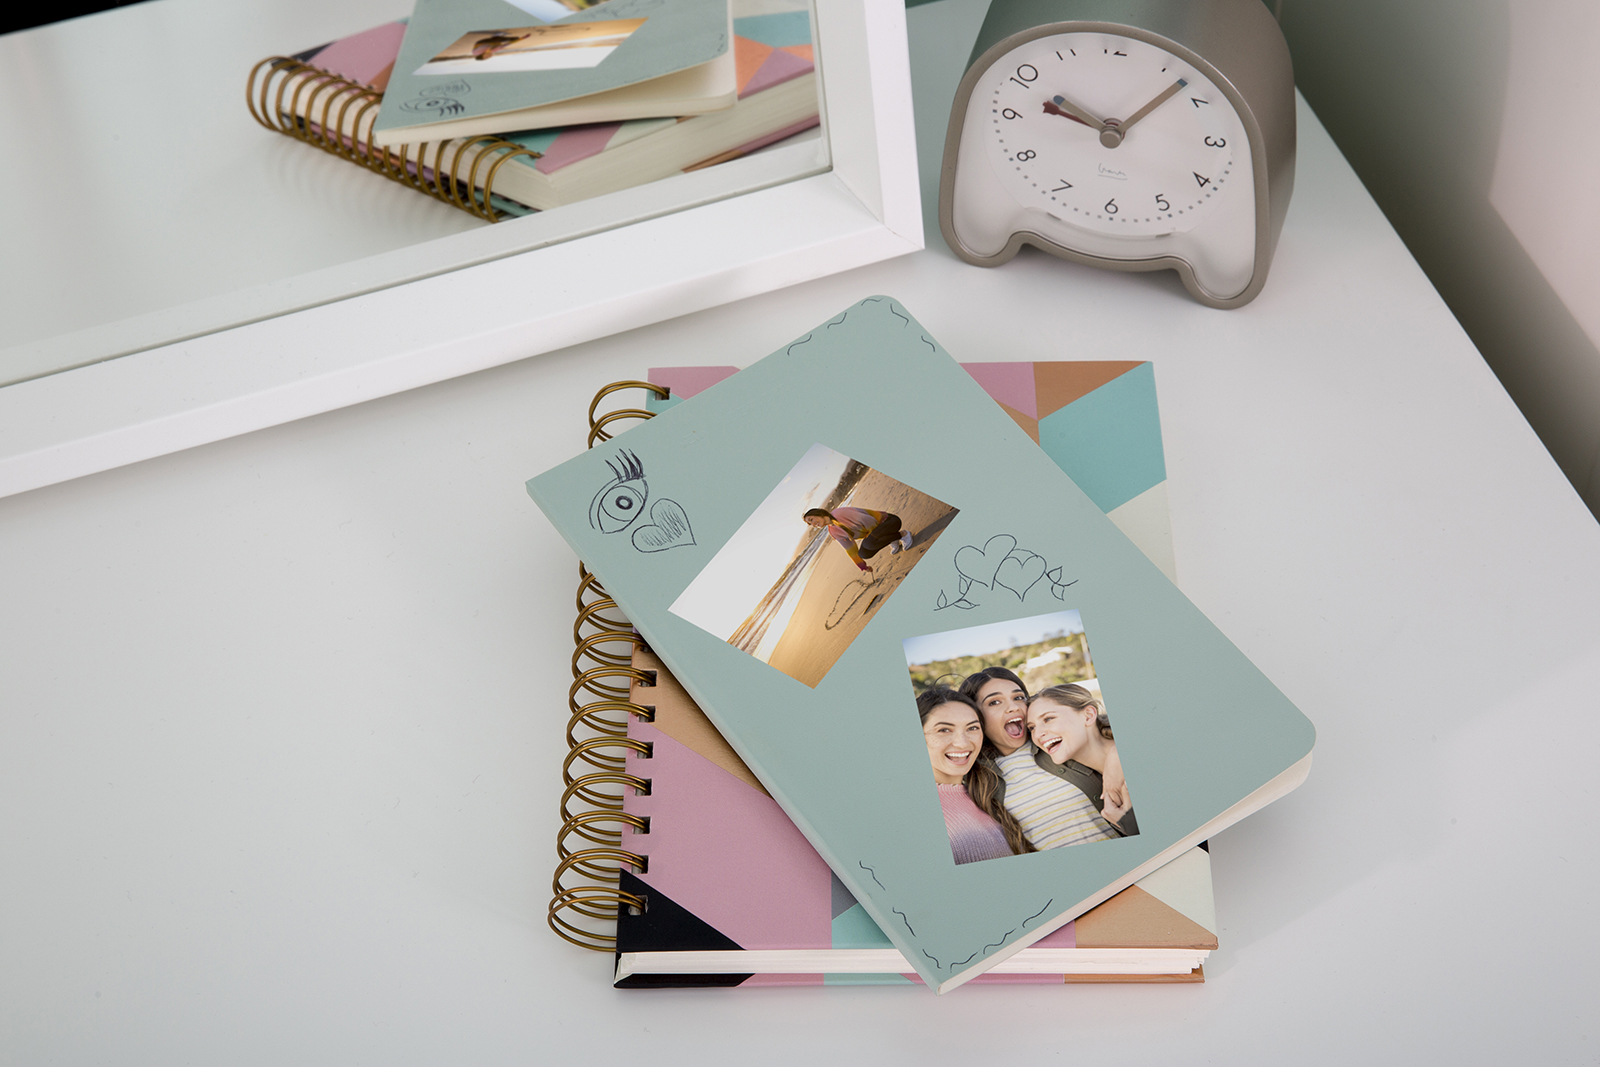 canon ivy mini photo printer bedroom notebook with images